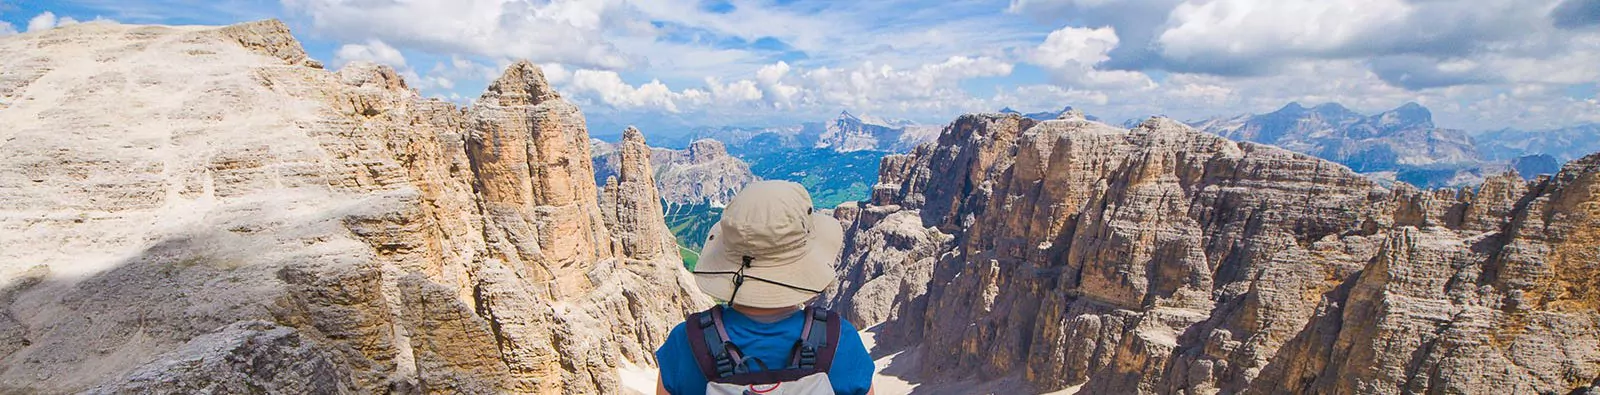 Hiker looking out at the Italian Dolomites